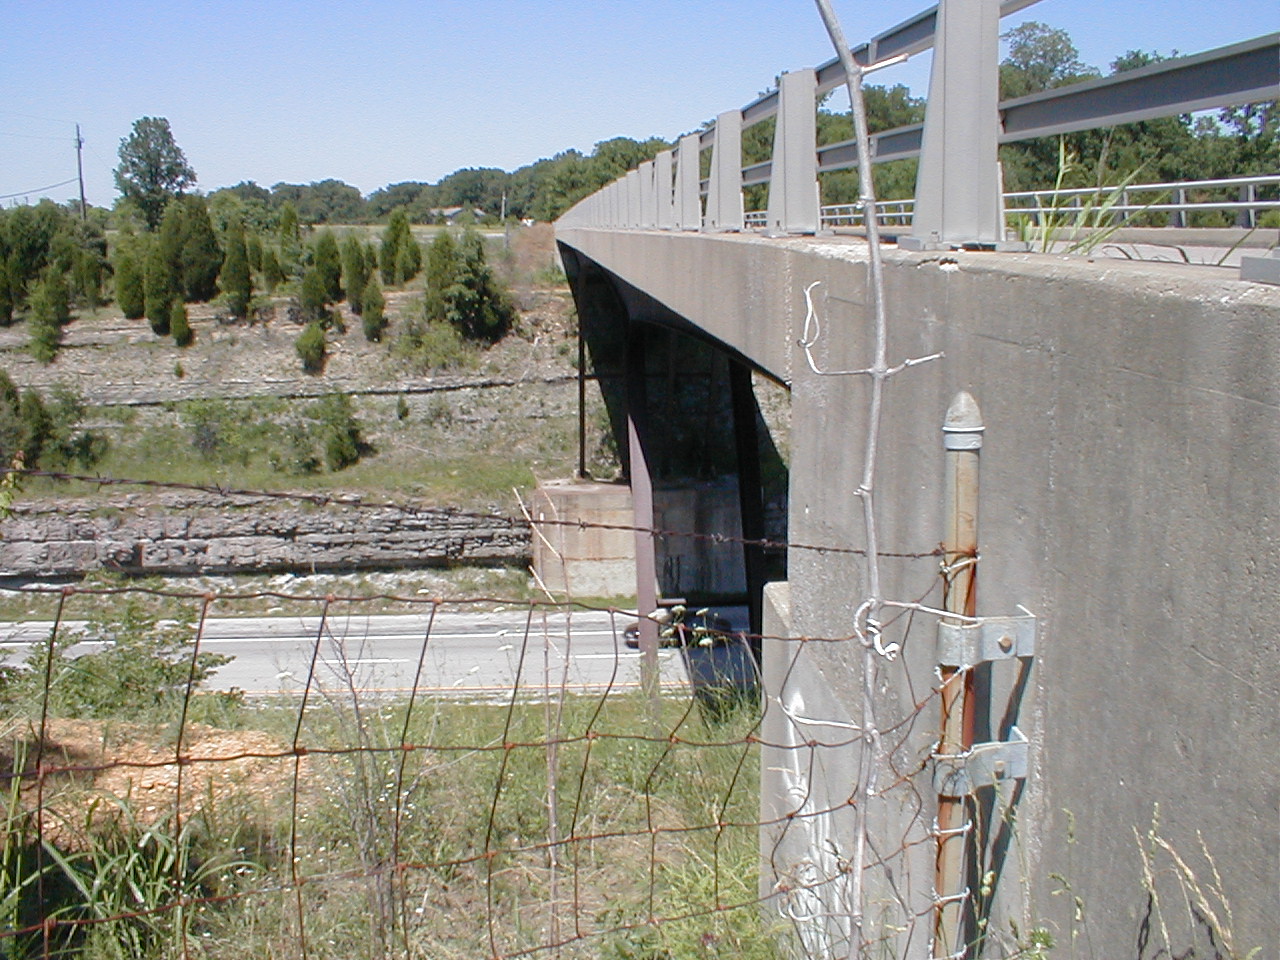 A side view of the overpass.